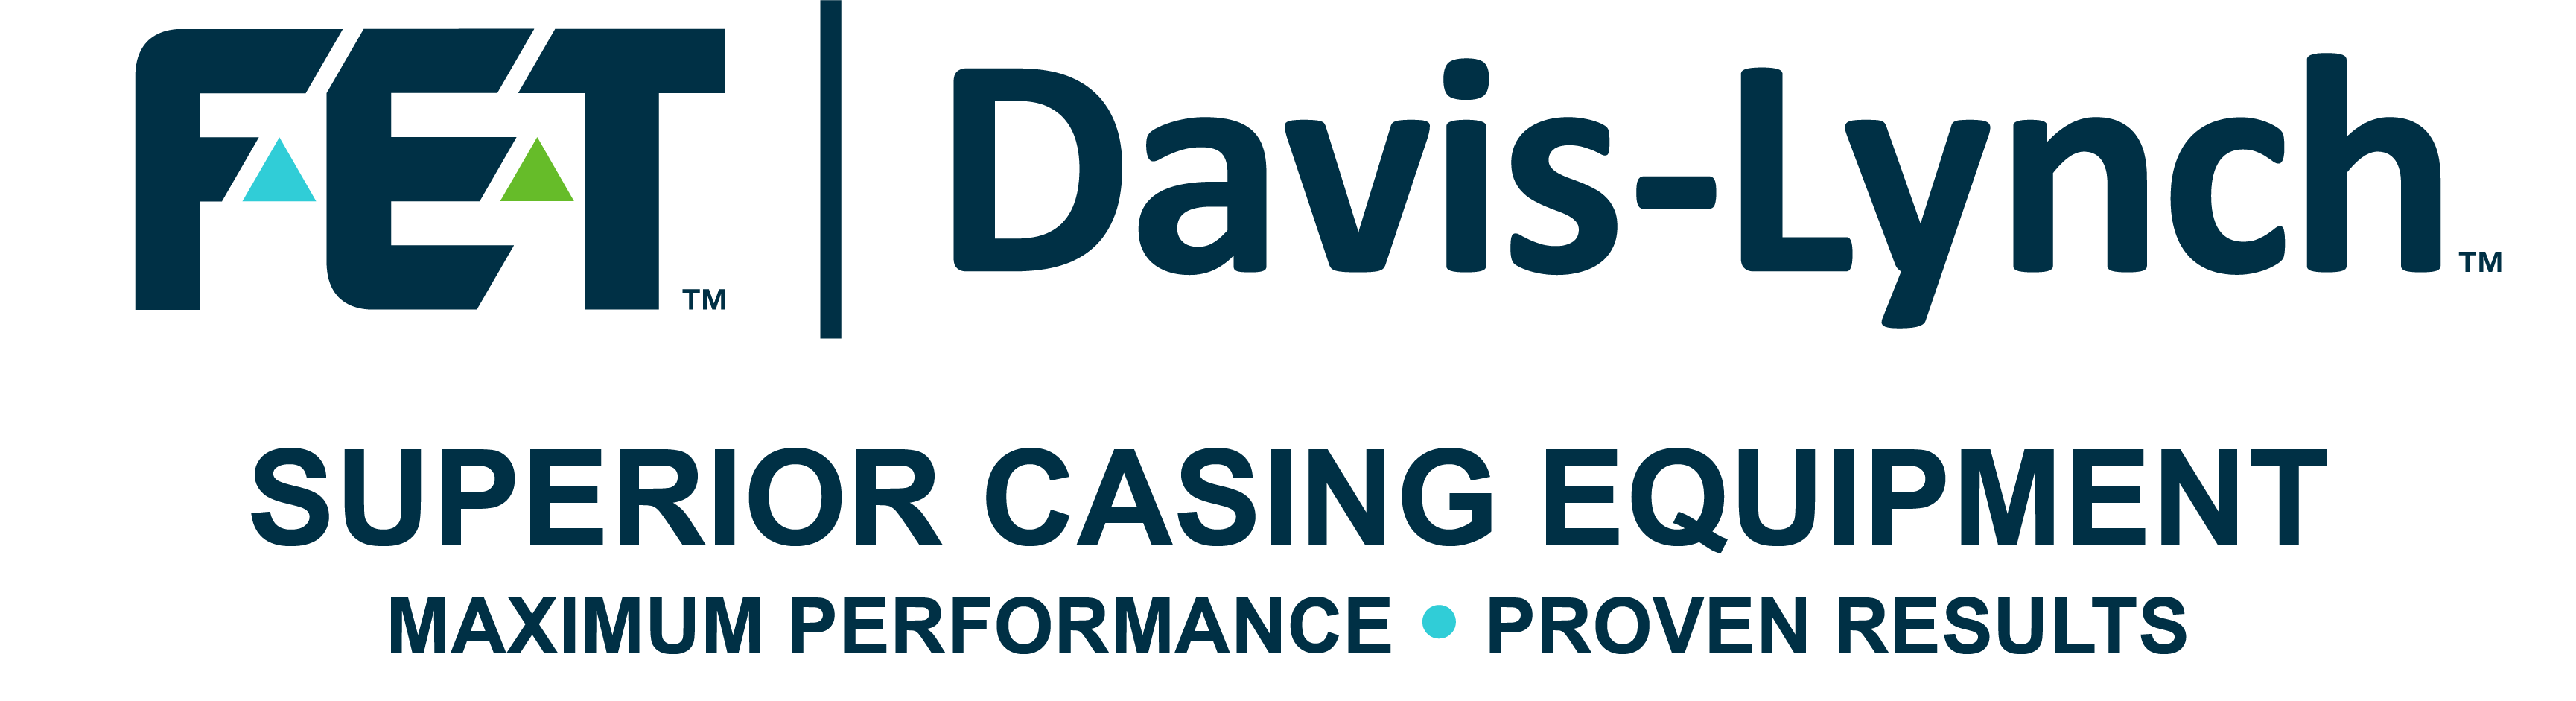 FET_Logo_Full_Color_RGB_Davis-Lynch-Primary Logo and Casing Equipment.png